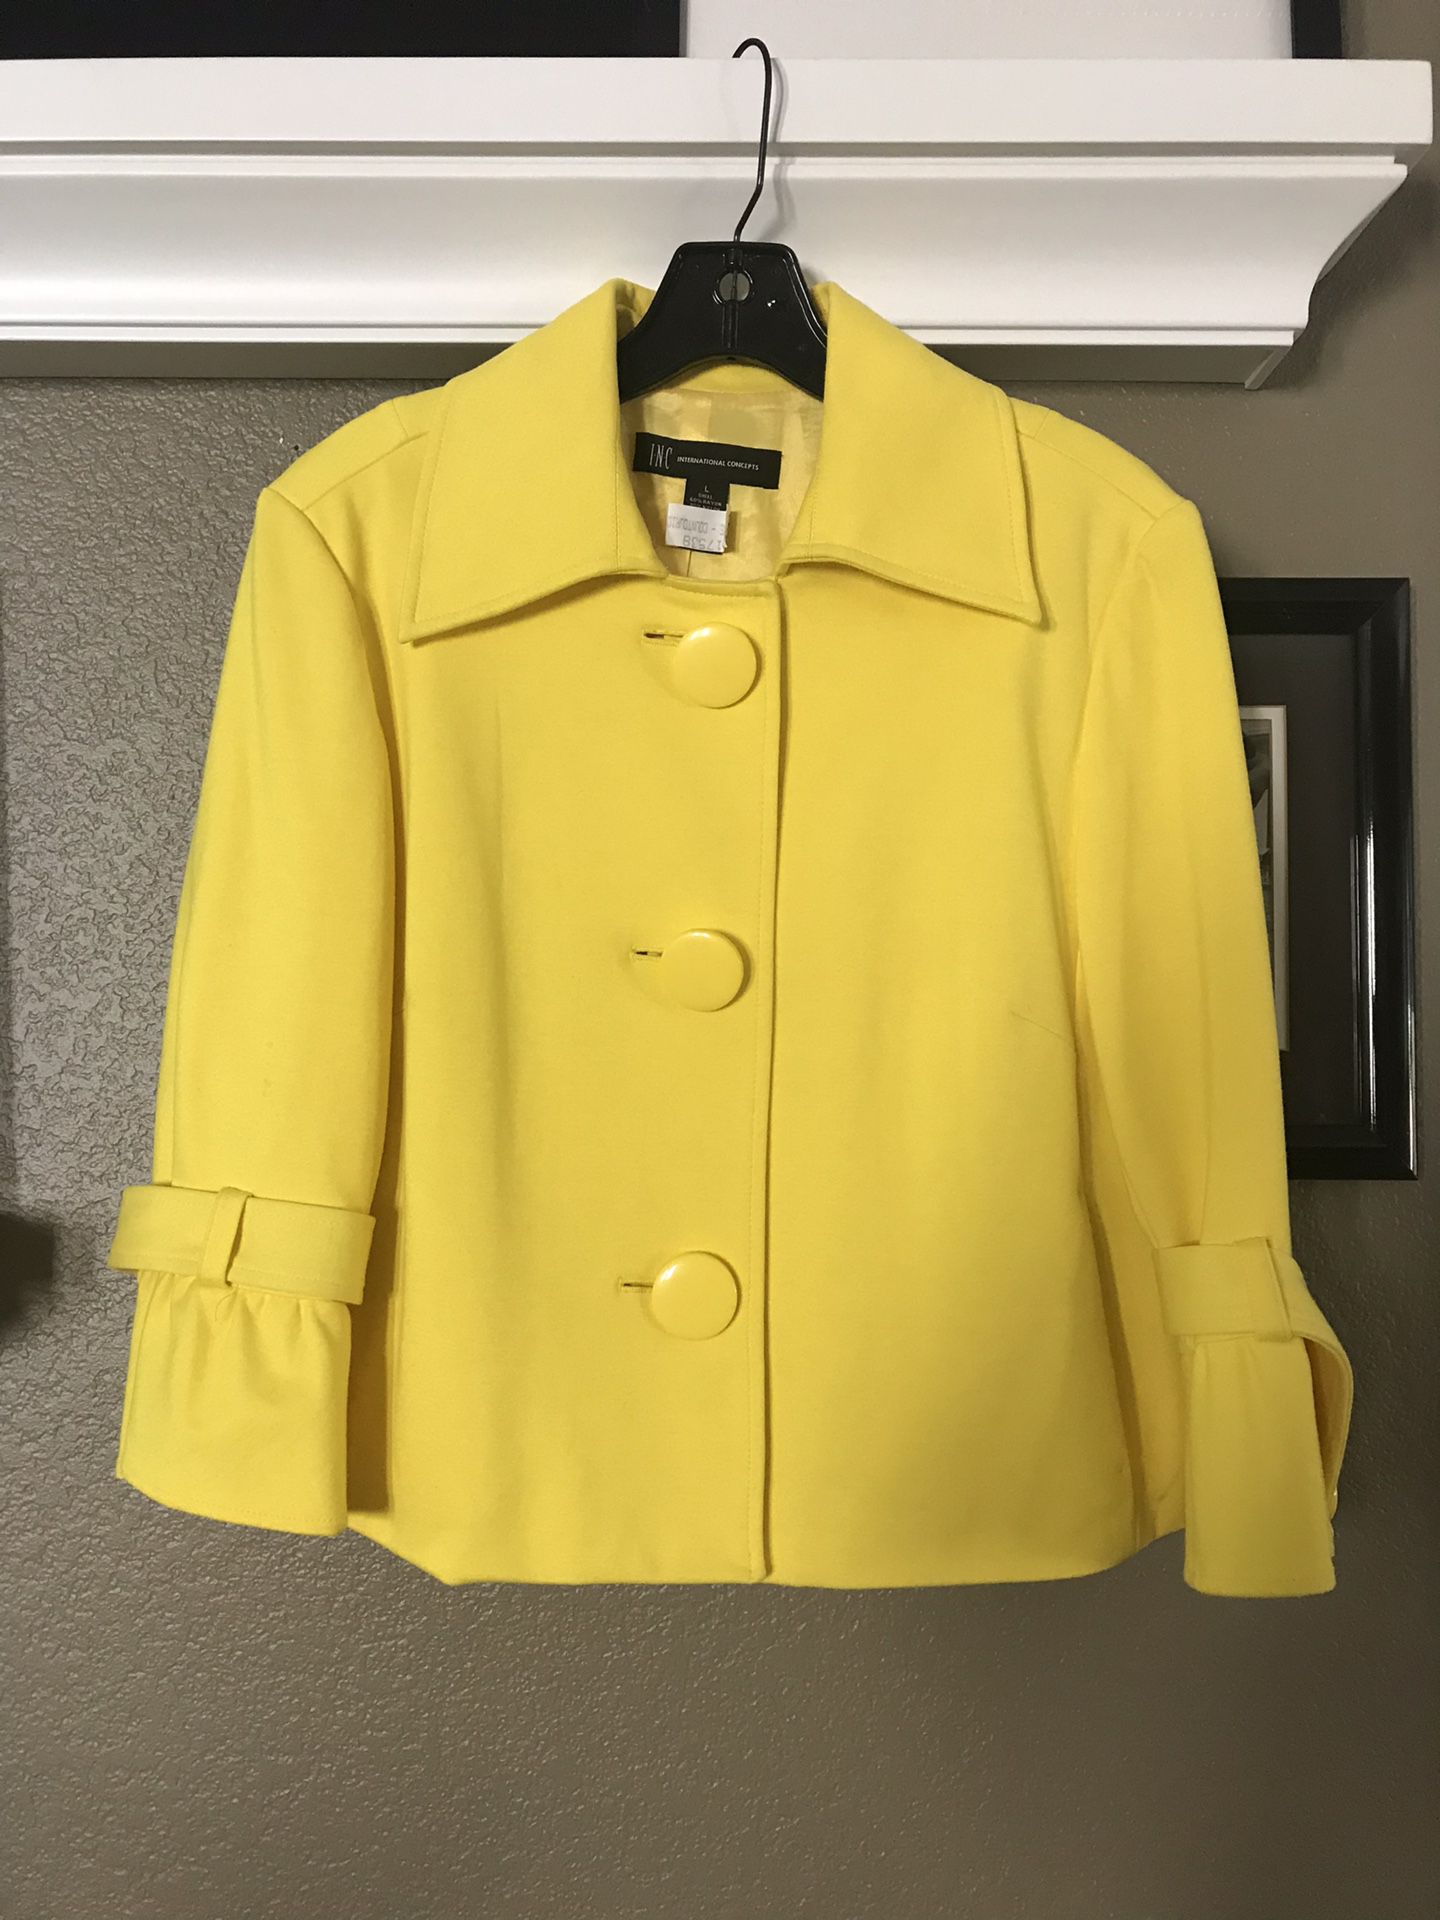 Macy’s Inc fully-lined yellow jacket, size L